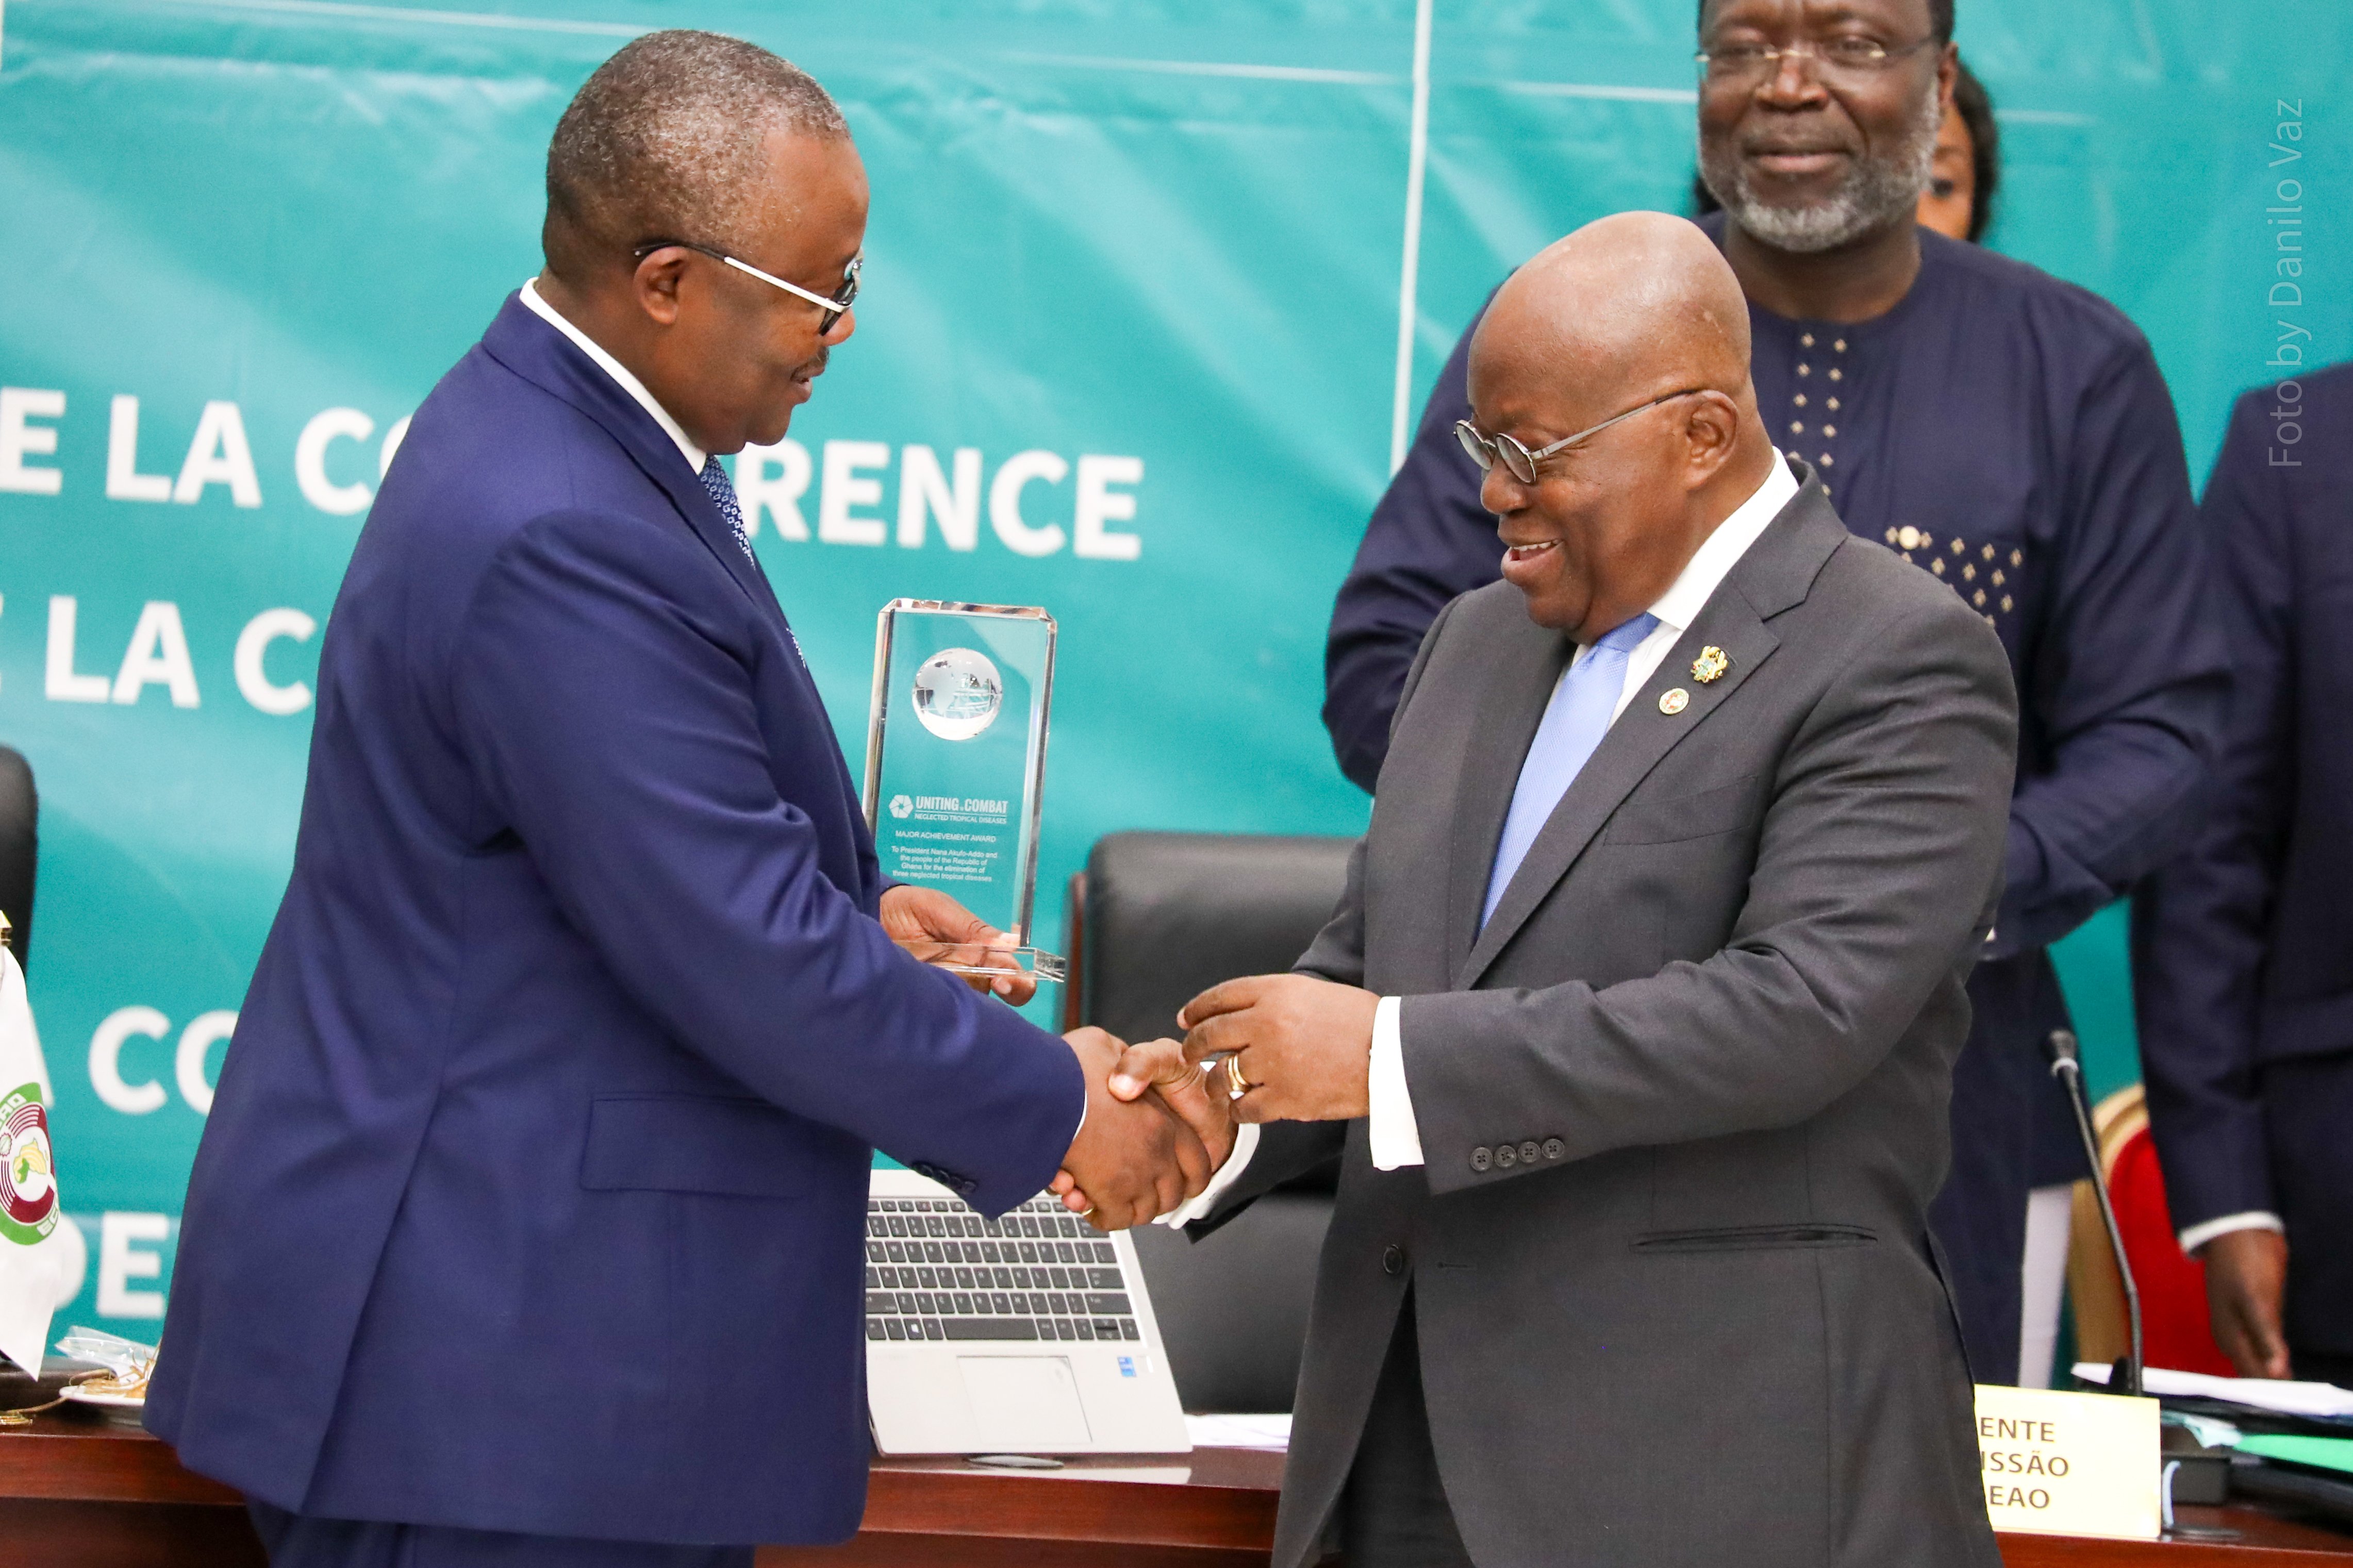 Umaro Sissoco Embaló, President of Guinea Bissau and Chair of the Authority of ECOWAS Heads of State and Government presents an award to Nana Akufo-Addo, President of the Republic of Ghana